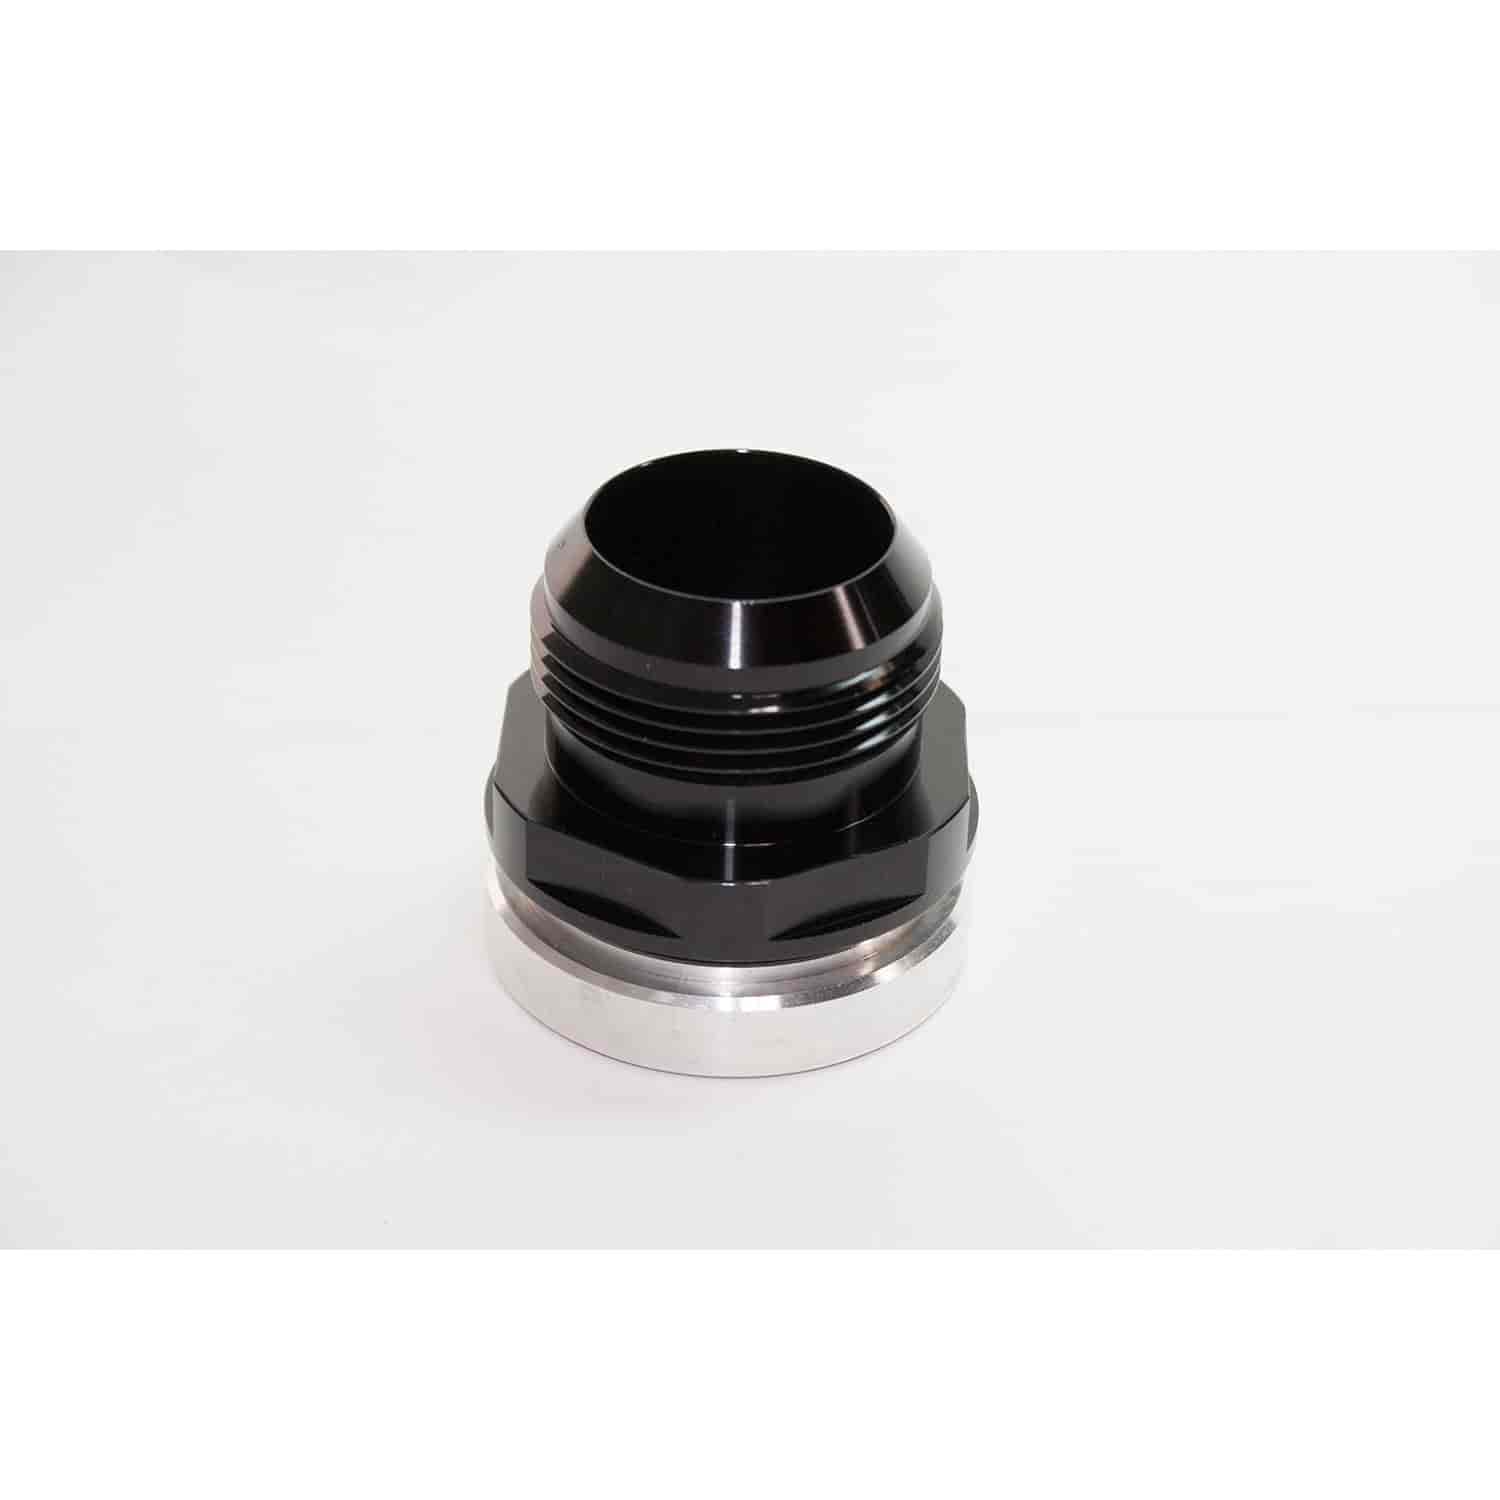 RADIATOR FITTING ADAPTER Union Straight -20AN O-Ring Male to -20AN Male Aluminum incl O ring and raw bung Black Anodized Each